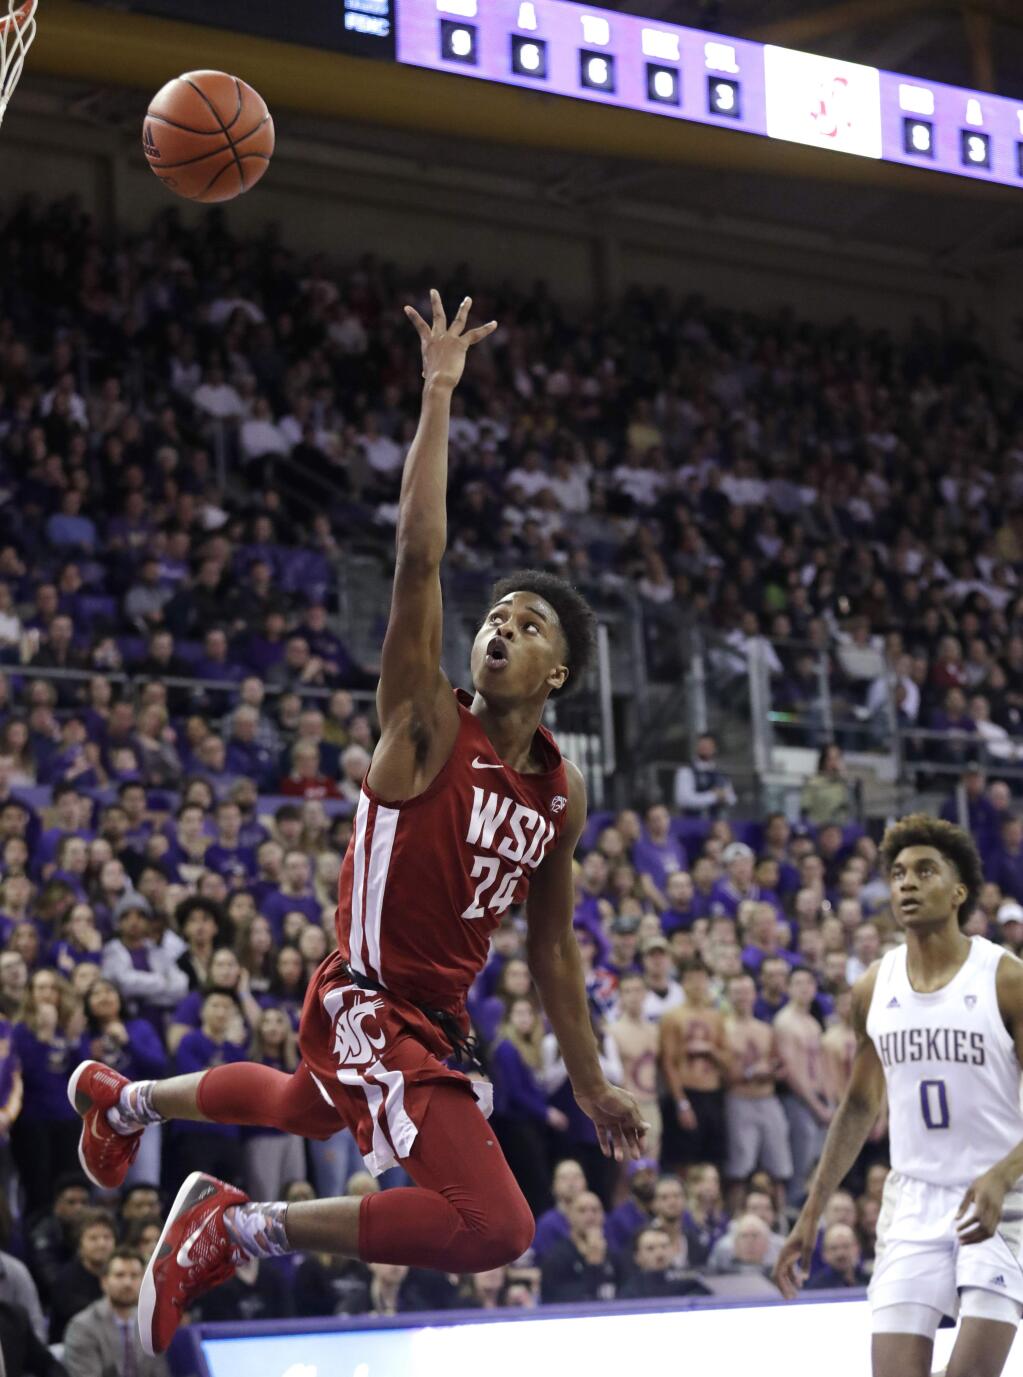 Washington State's Noah Williams (24) shoots against Washington during the first half of an NCAA college basketball game Friday, Feb. 28, 2020, in Seattle. (AP Photo/Elaine Thompson)